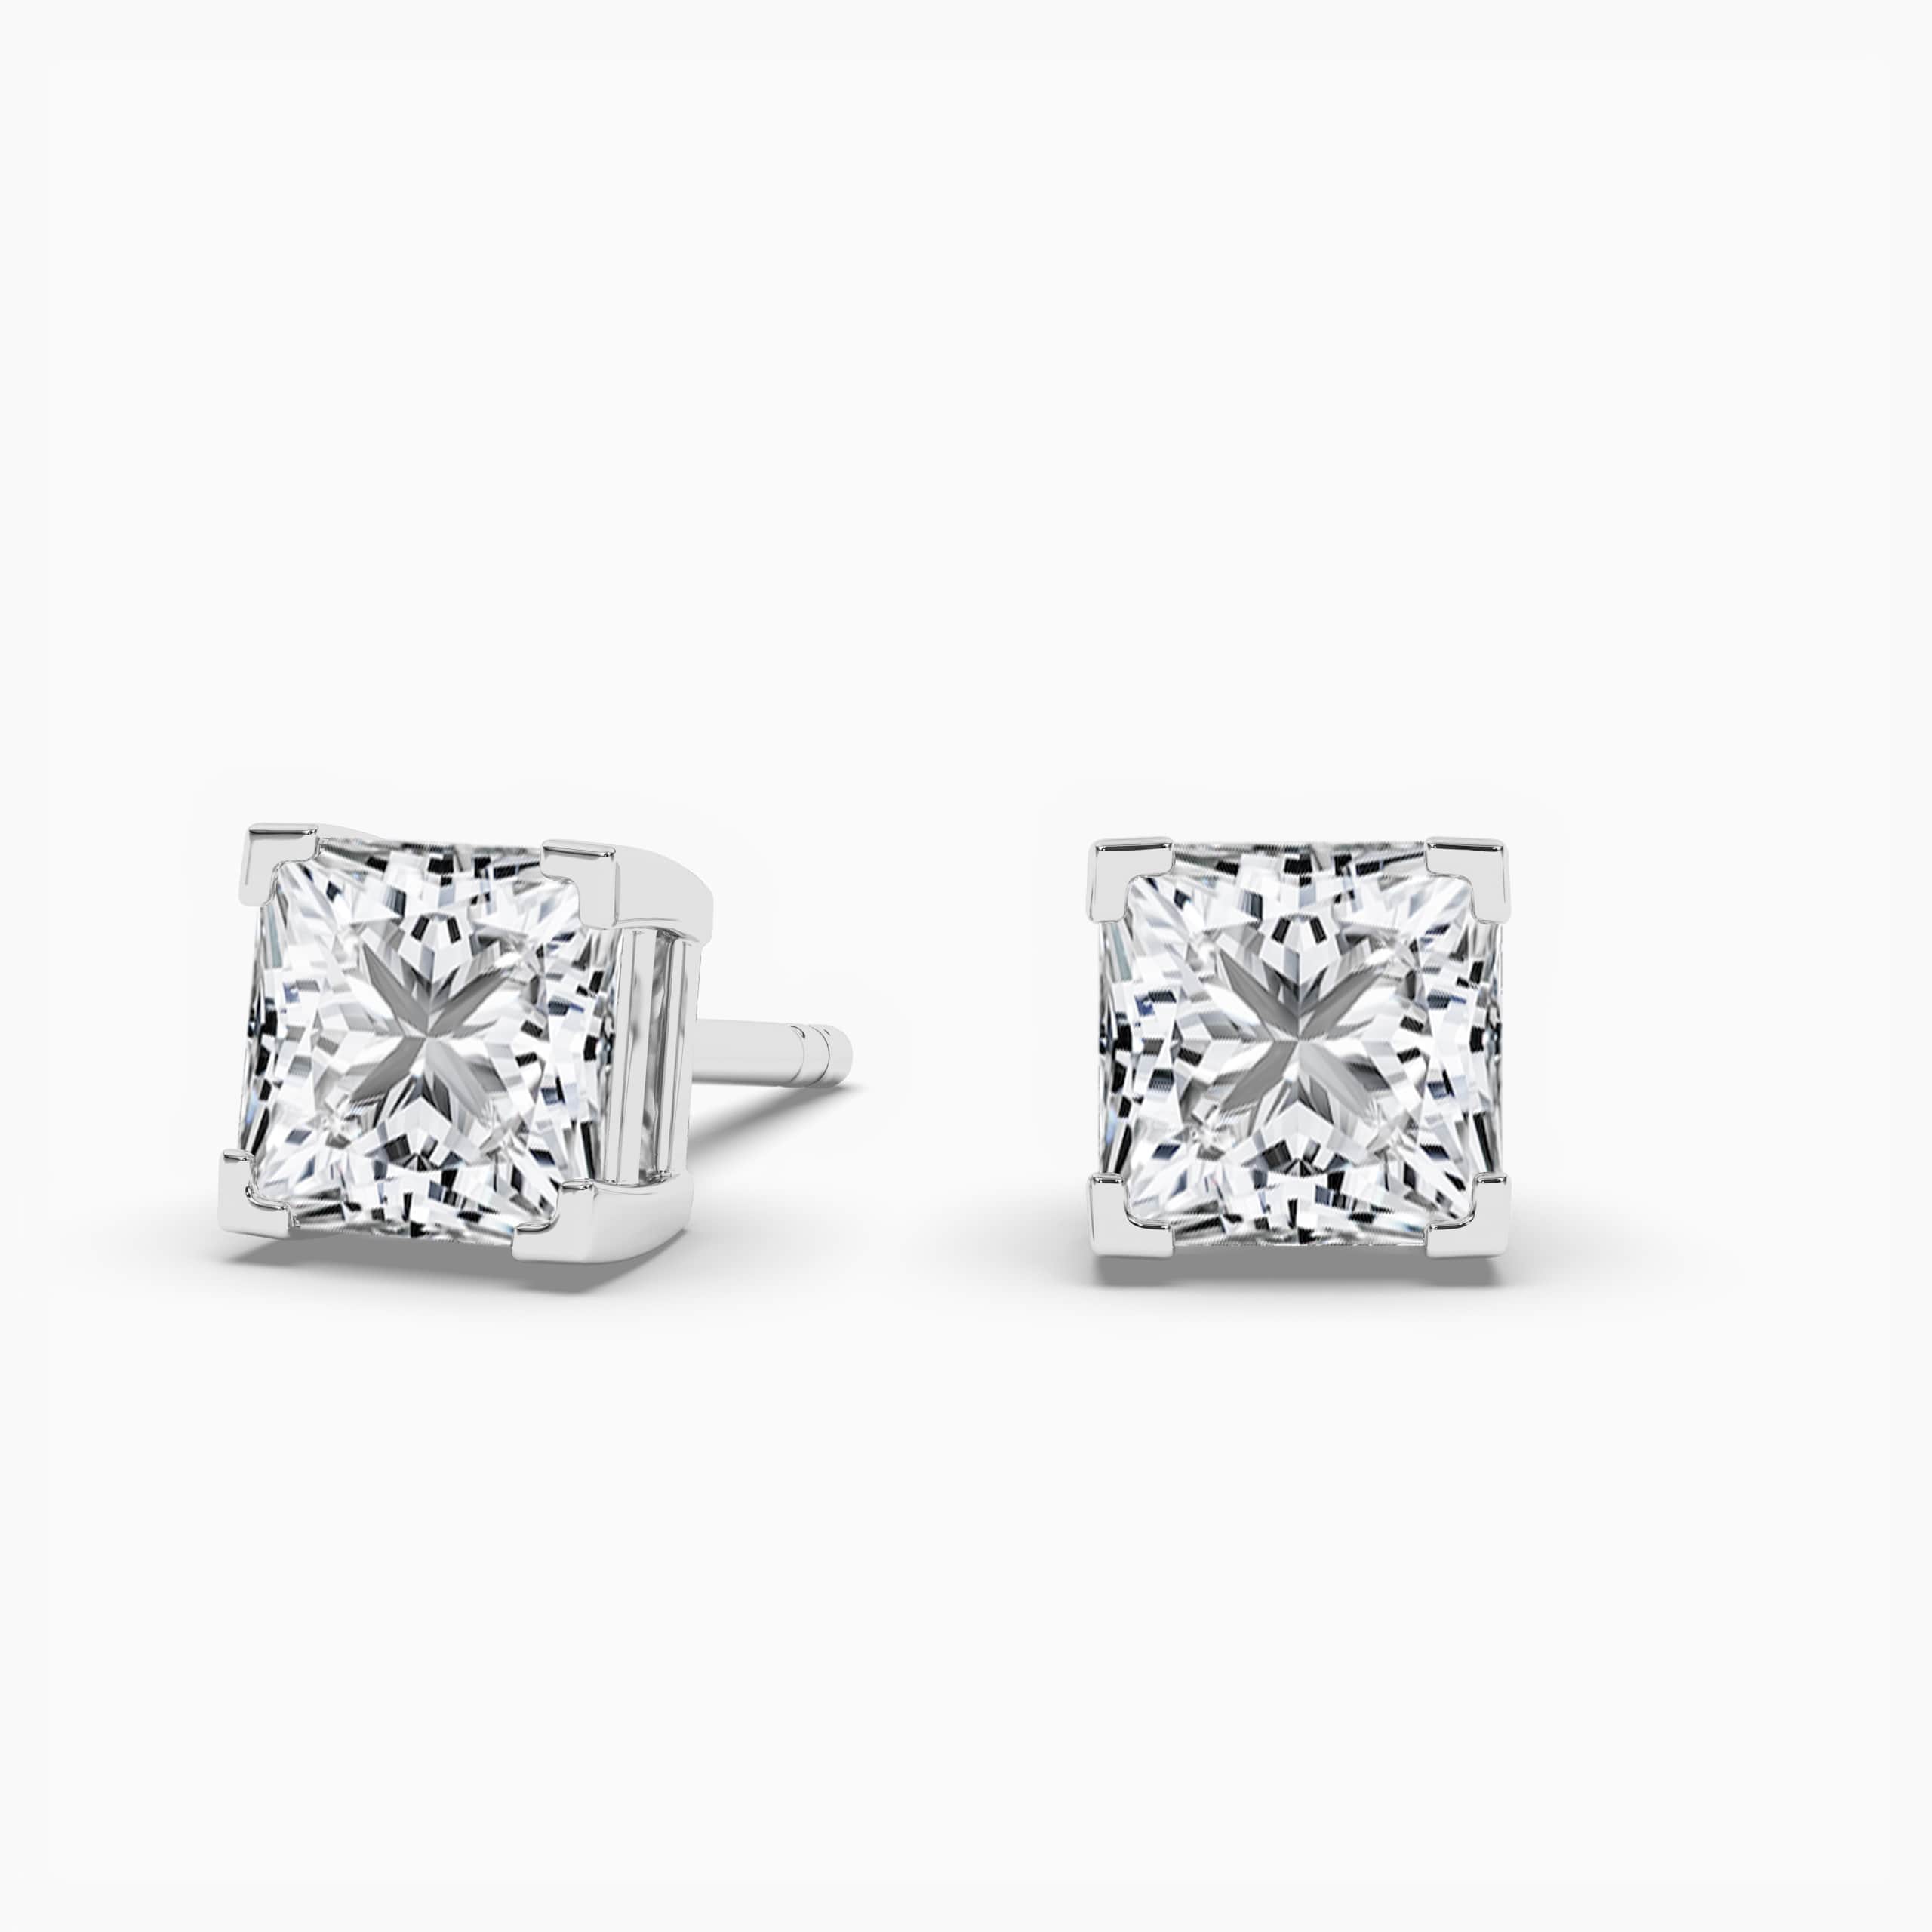 PRINCESS-CUT DIAMOND SOLITAIRE EARRINGS IN WHITE  GOLD